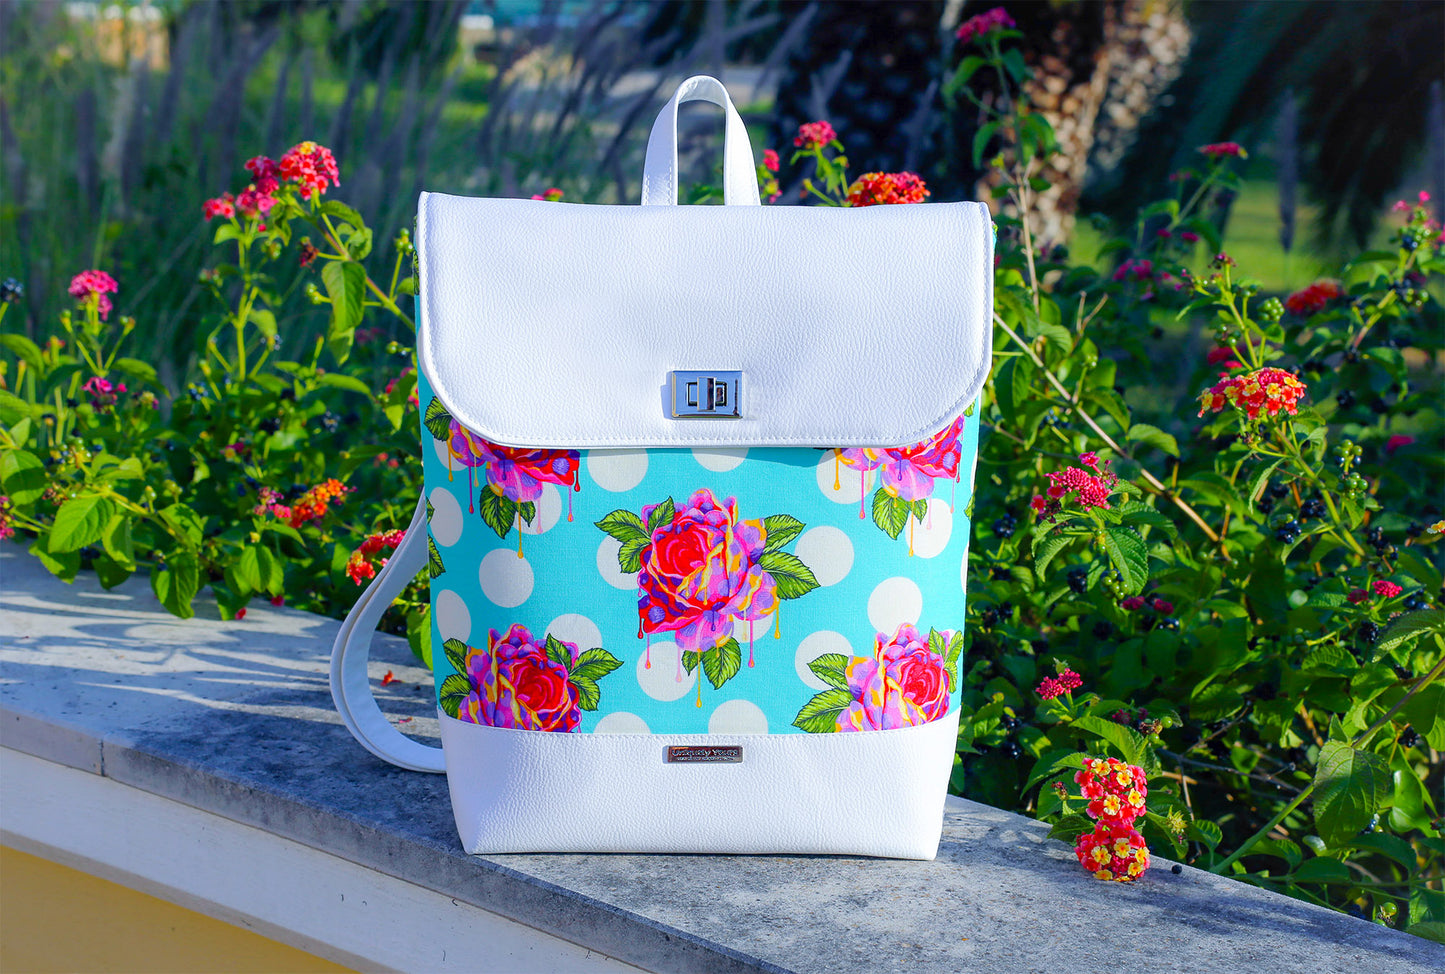 Bonn Backpack Pattern in Tula Pink fabric and white vinyl.